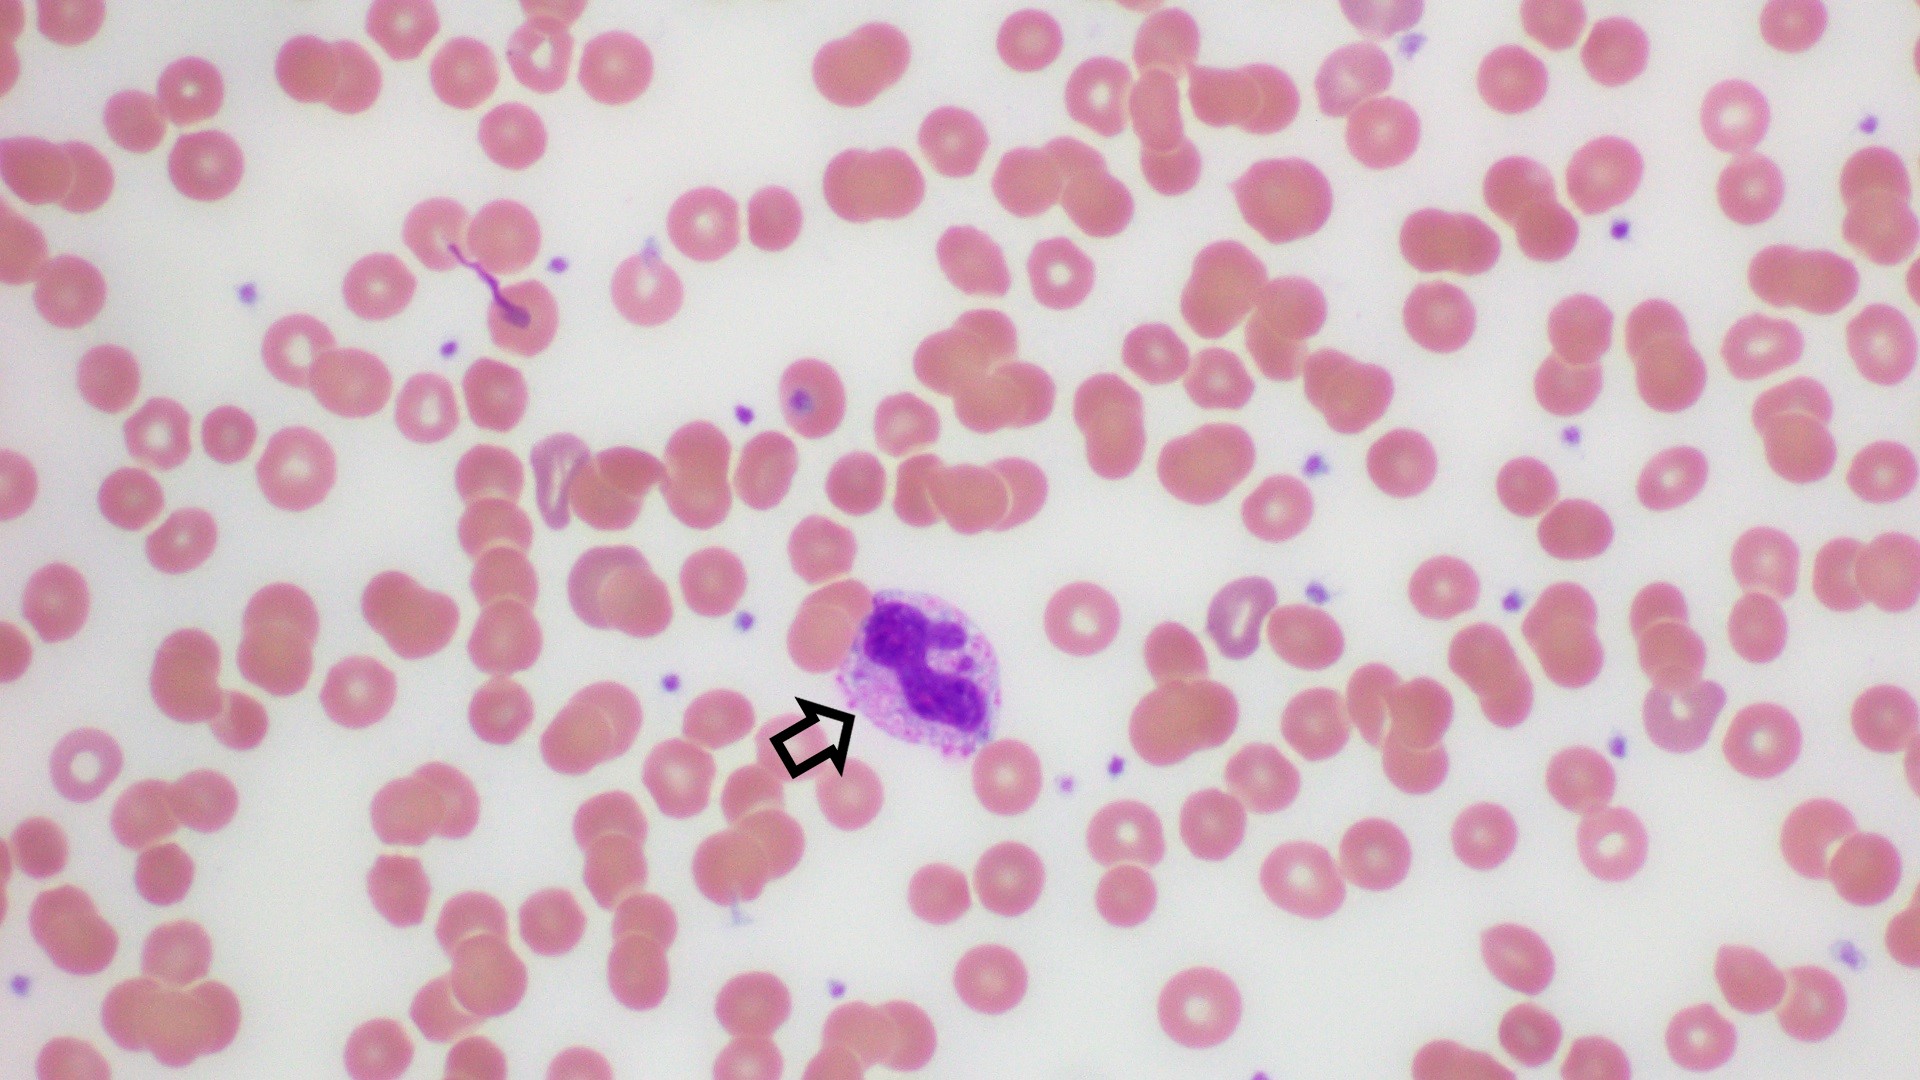 A Hematoxylin and Eosin (H&E) stained slide showing Döhle bodies  that are light blue-gray, oval, basophilic, leukocyte inclusions located in the peripheral cytoplasm of neutrophil (arrow). 